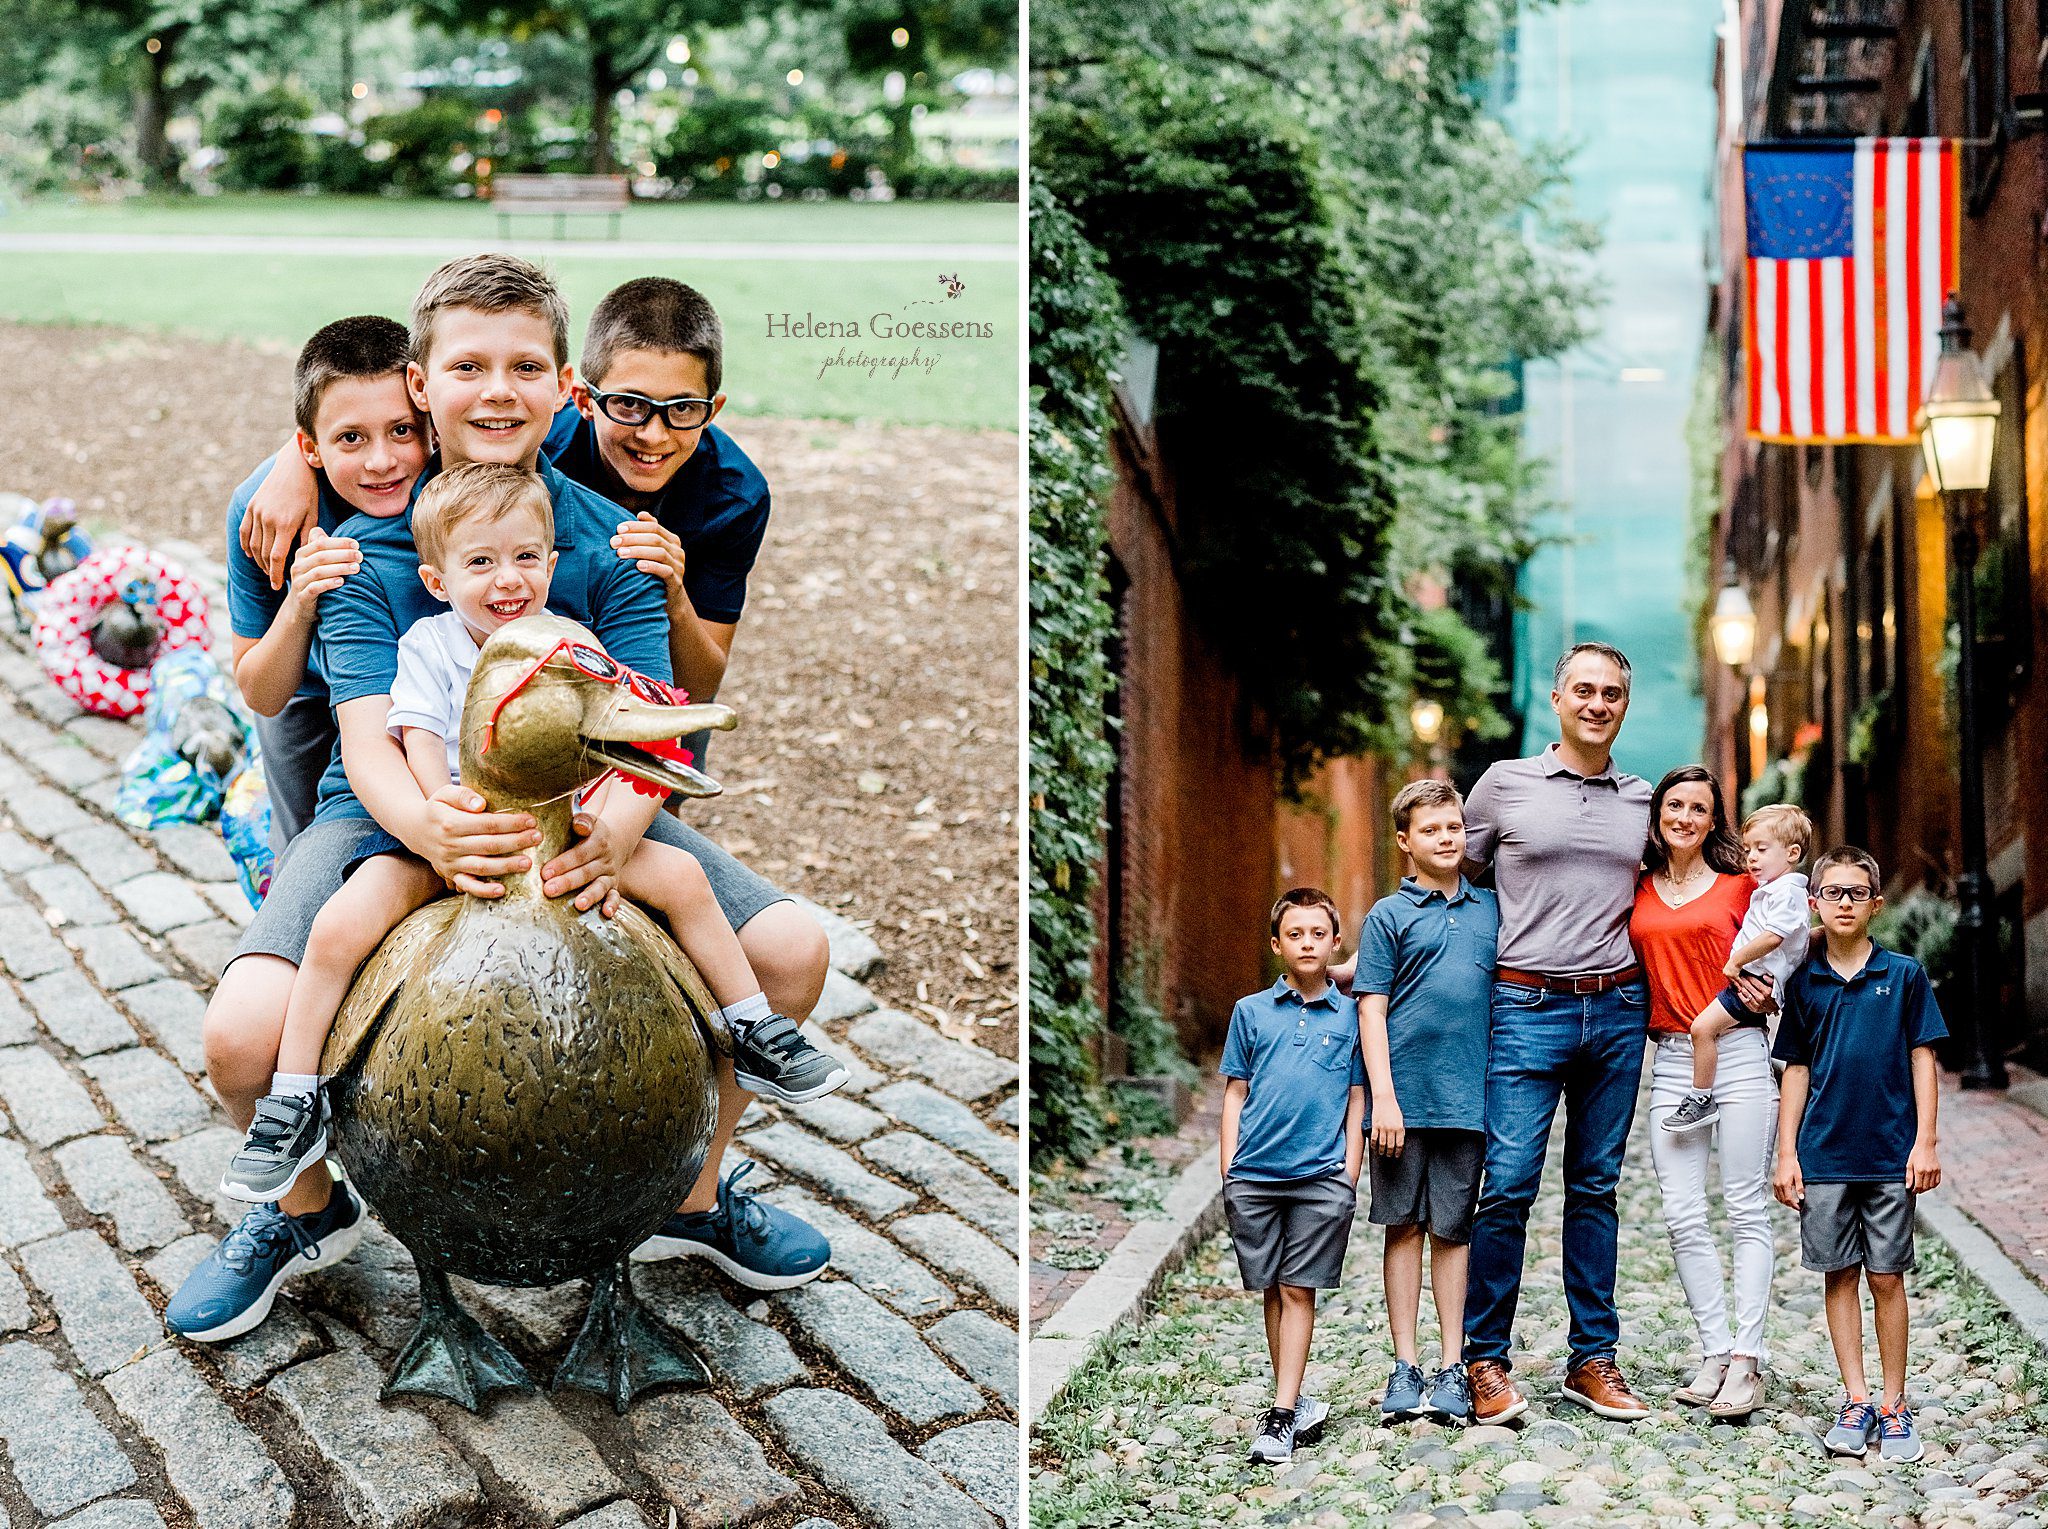 Boston Public Garden family session with ducklings photographed by Helena Goessens Photography